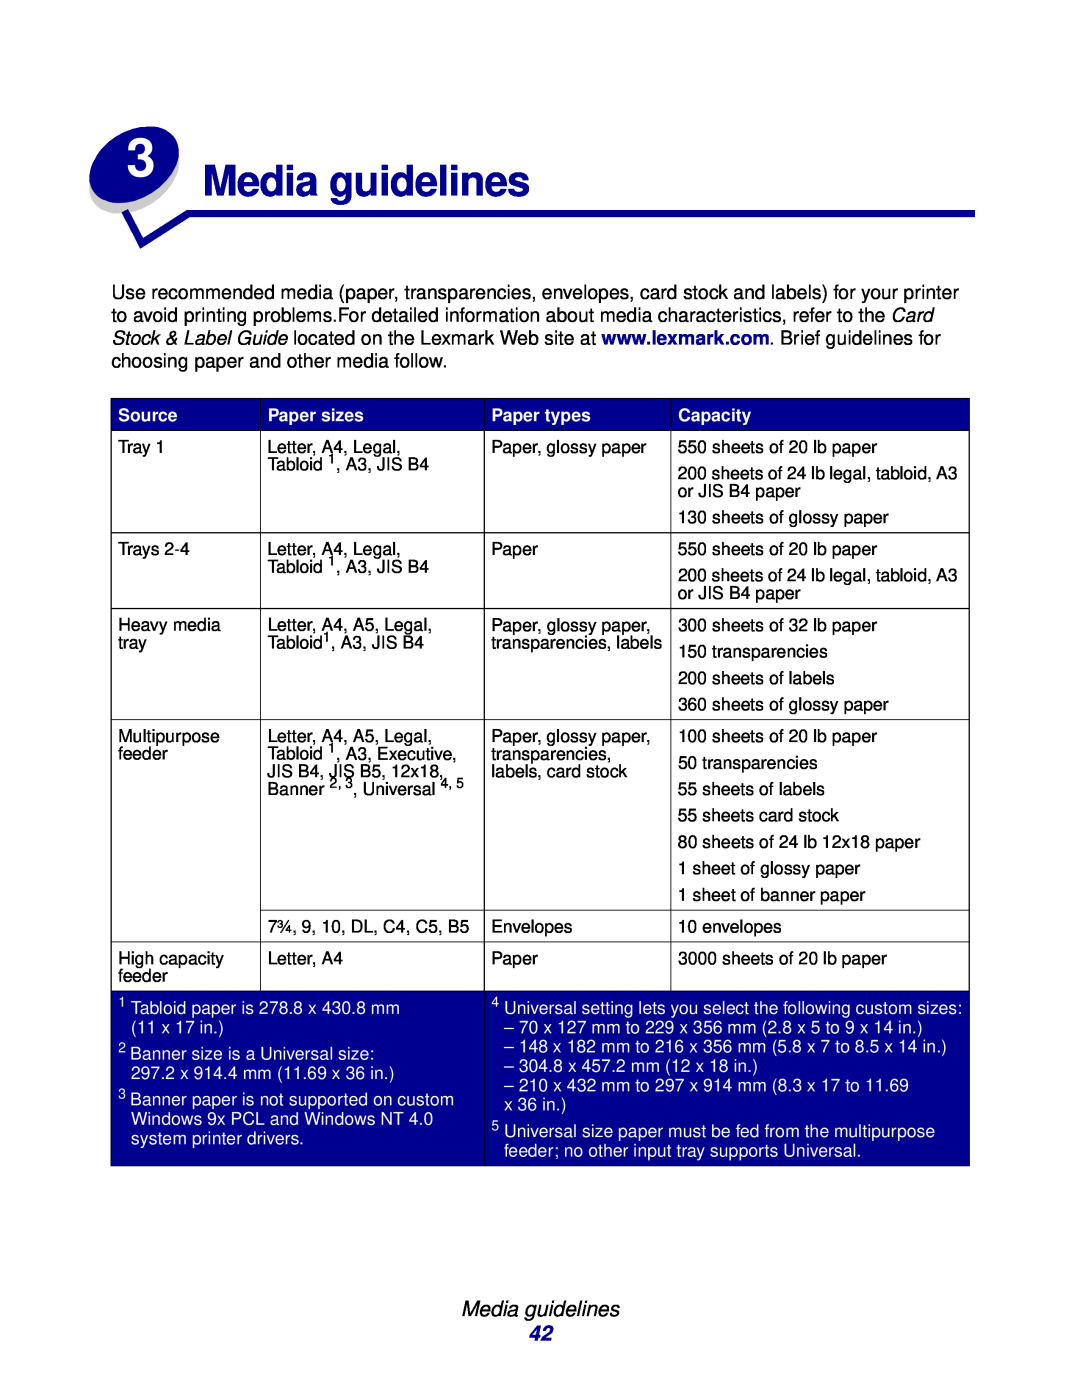 Lexmark 912 manual Media guidelines, Source, Paper sizes, Paper types, Capacity 